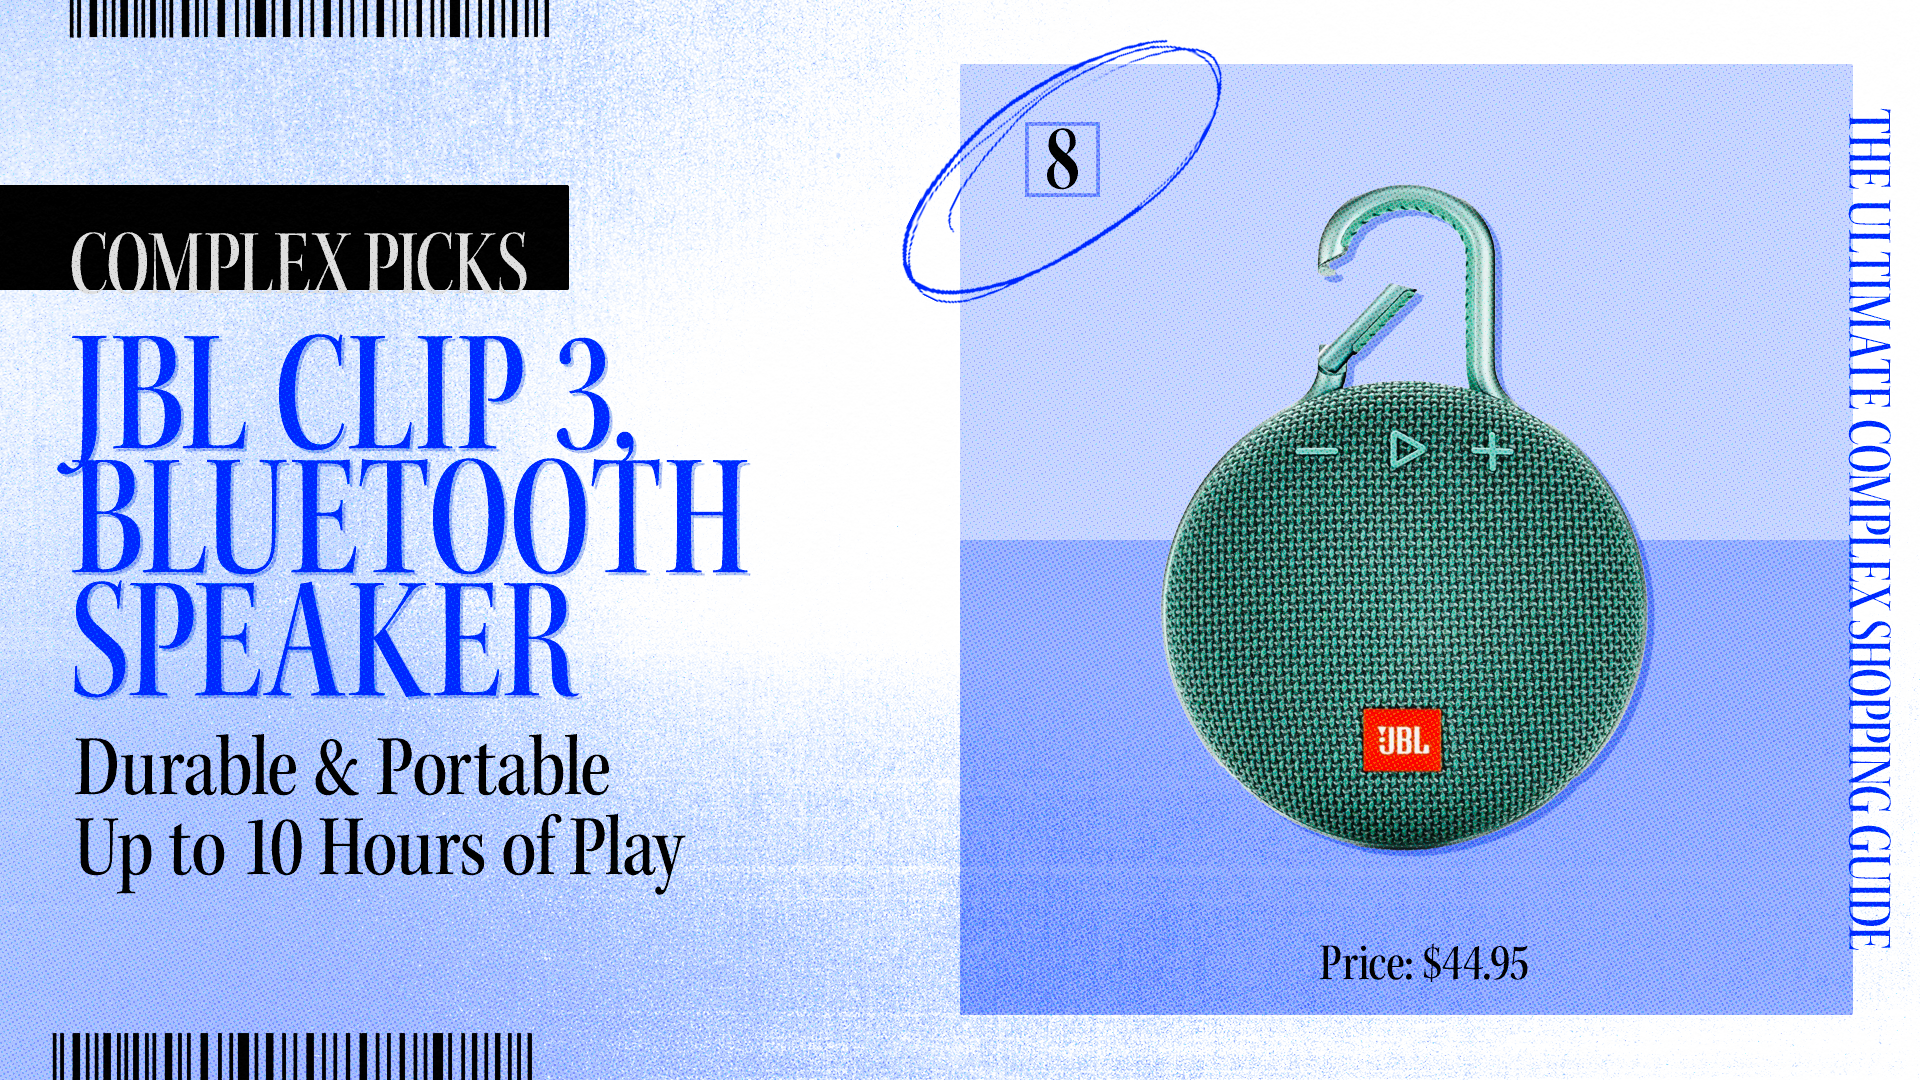 Advertisement for the JBL Clip 3 Bluetooth speaker, highlighting its durability, portability, and up to 10 hours of playtime. Price: $44.95